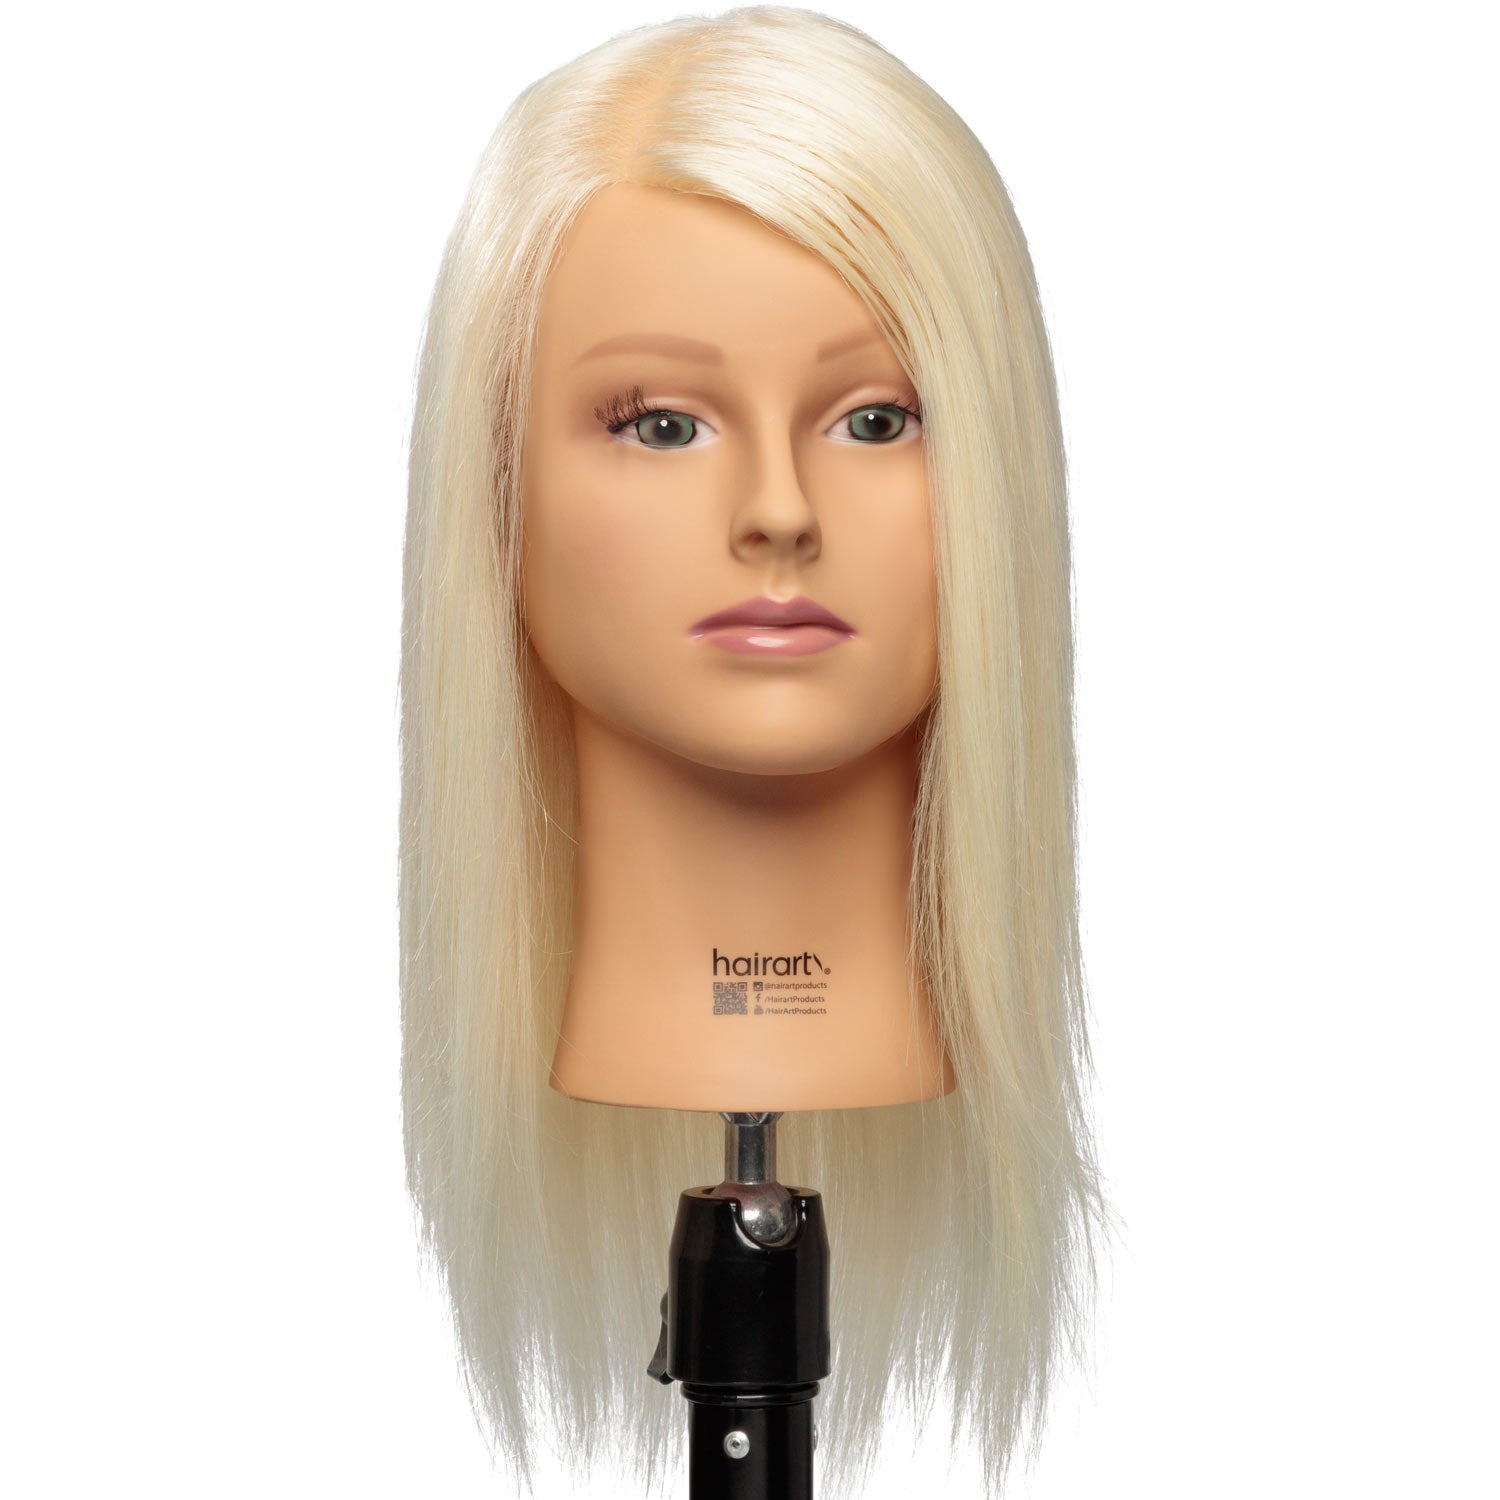 RIHANNAHAIR 100% Real Human Hair Mannequin Head with Stand Manikin  Cosmetology Doll Training Head for Hairdresser Practice Braiding Styling  Coloring